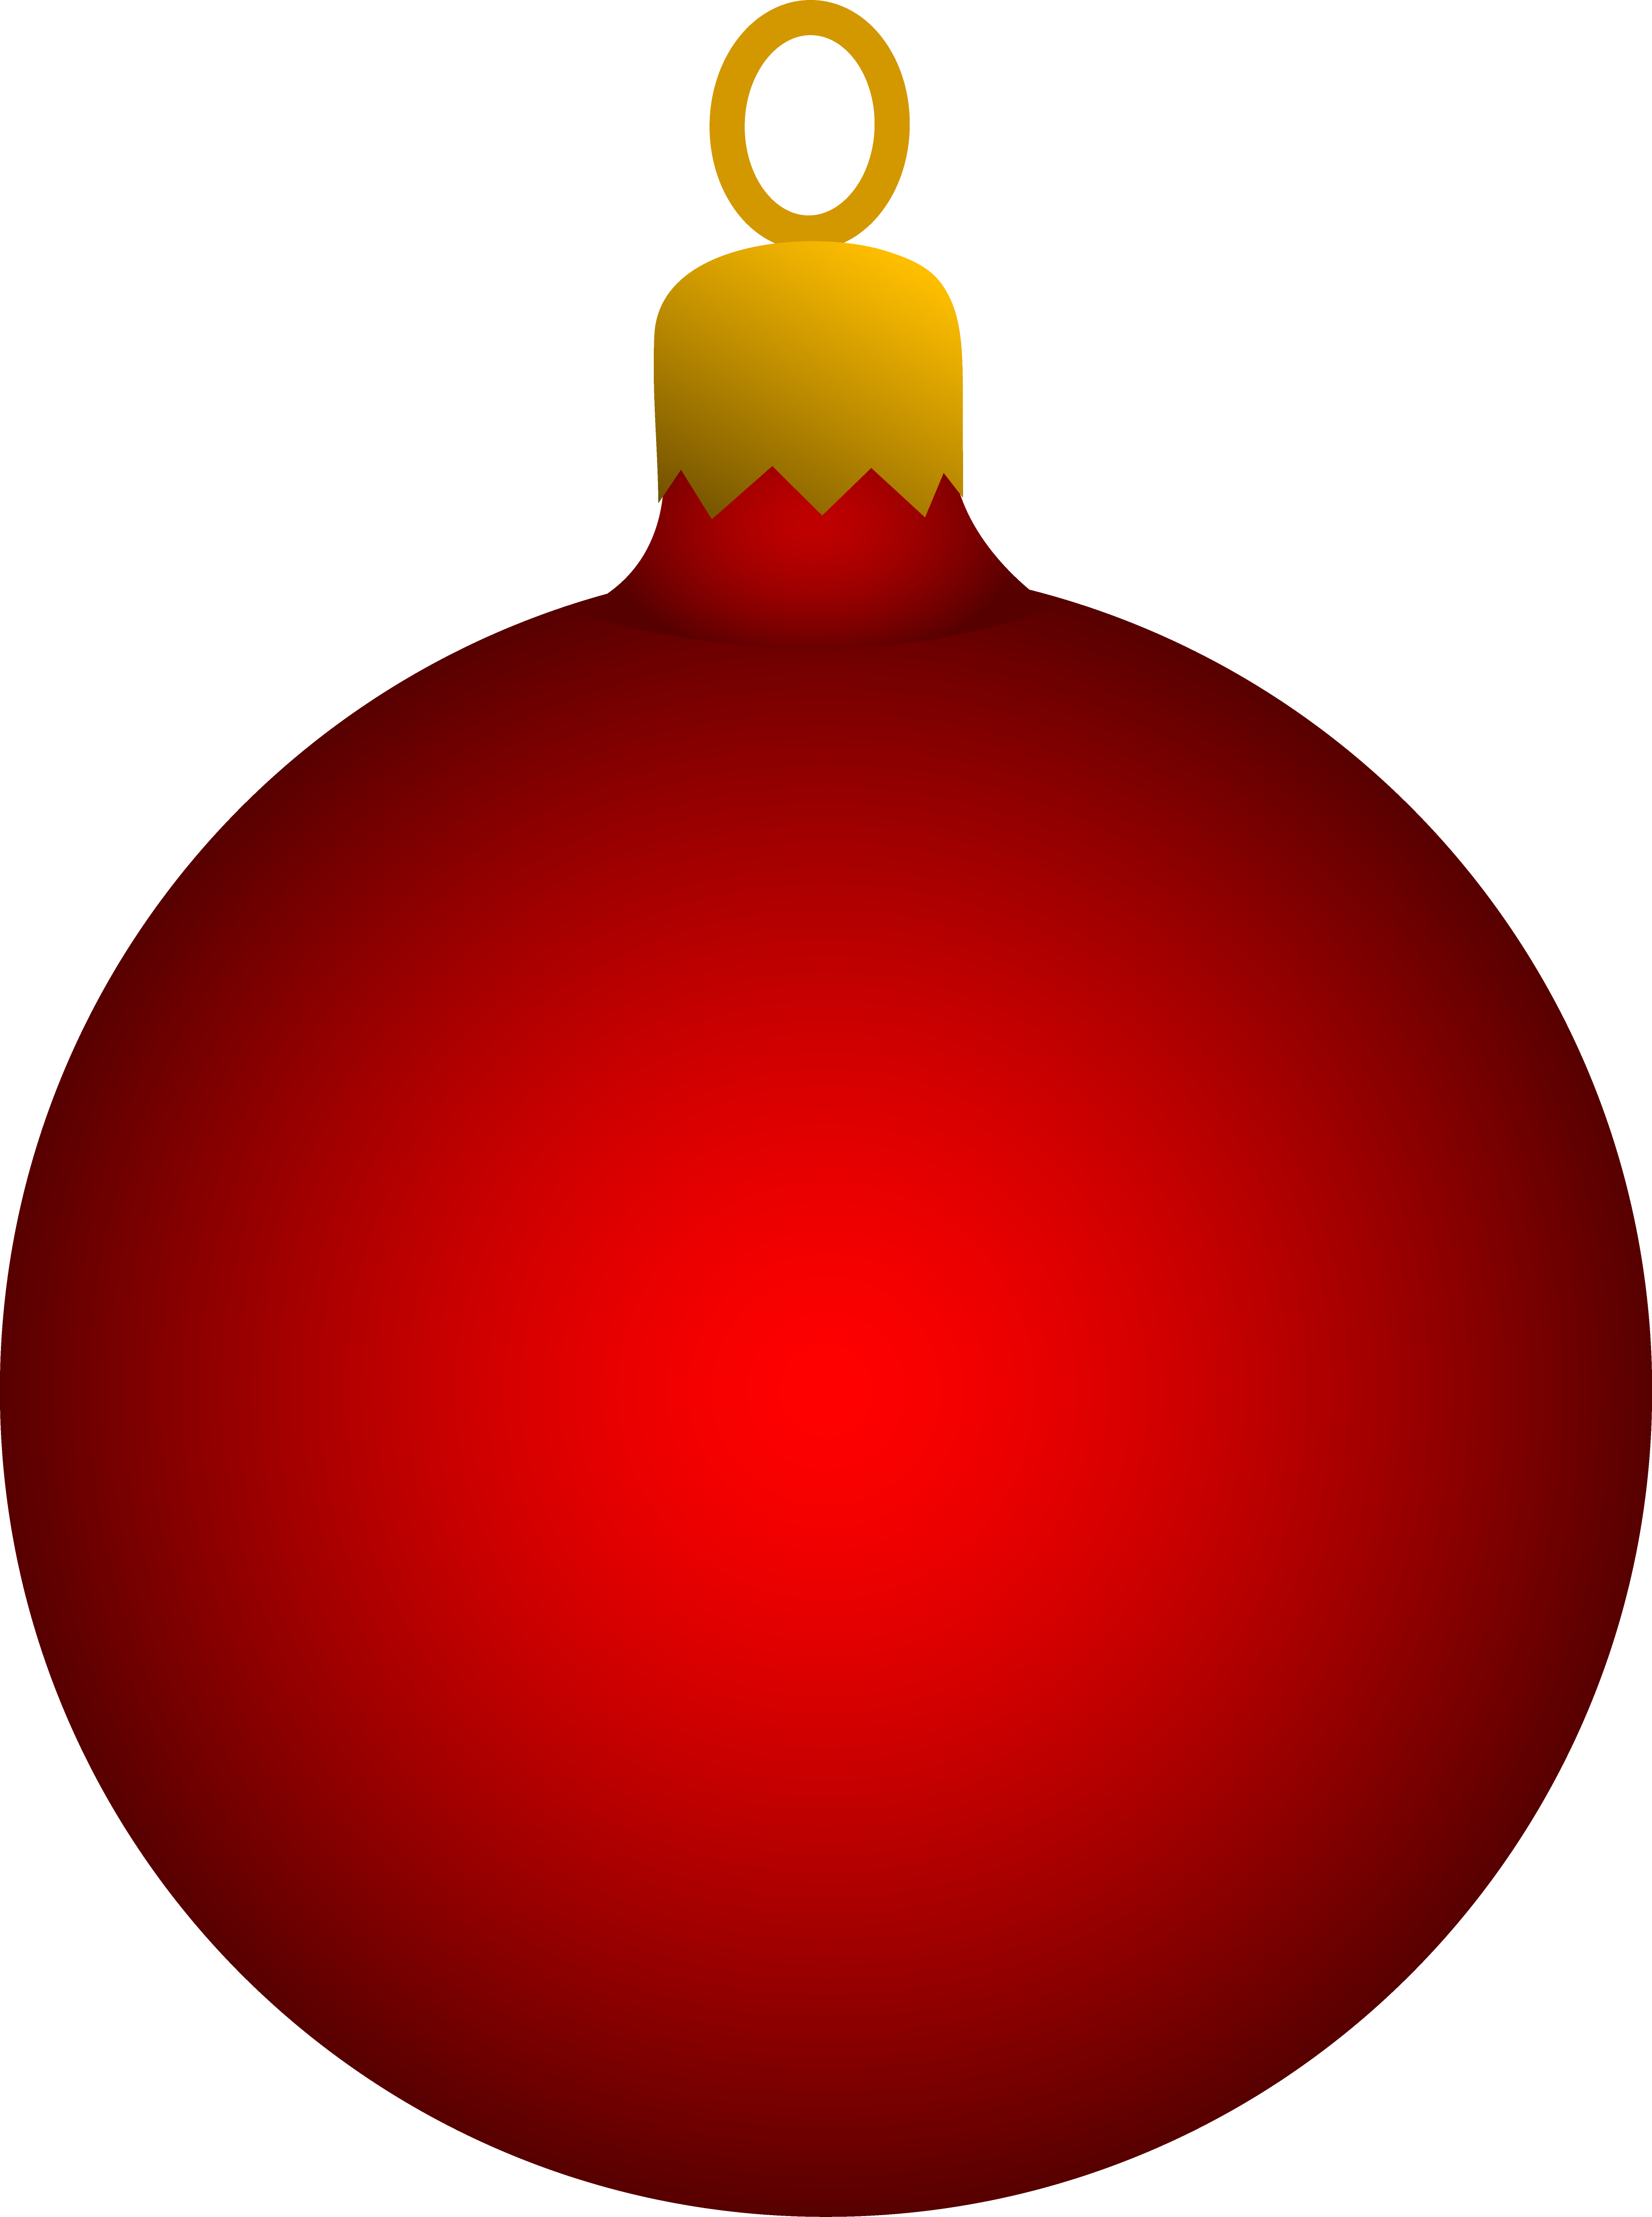 Free Christmas Ornaments Clipart, Download Free Clip Art